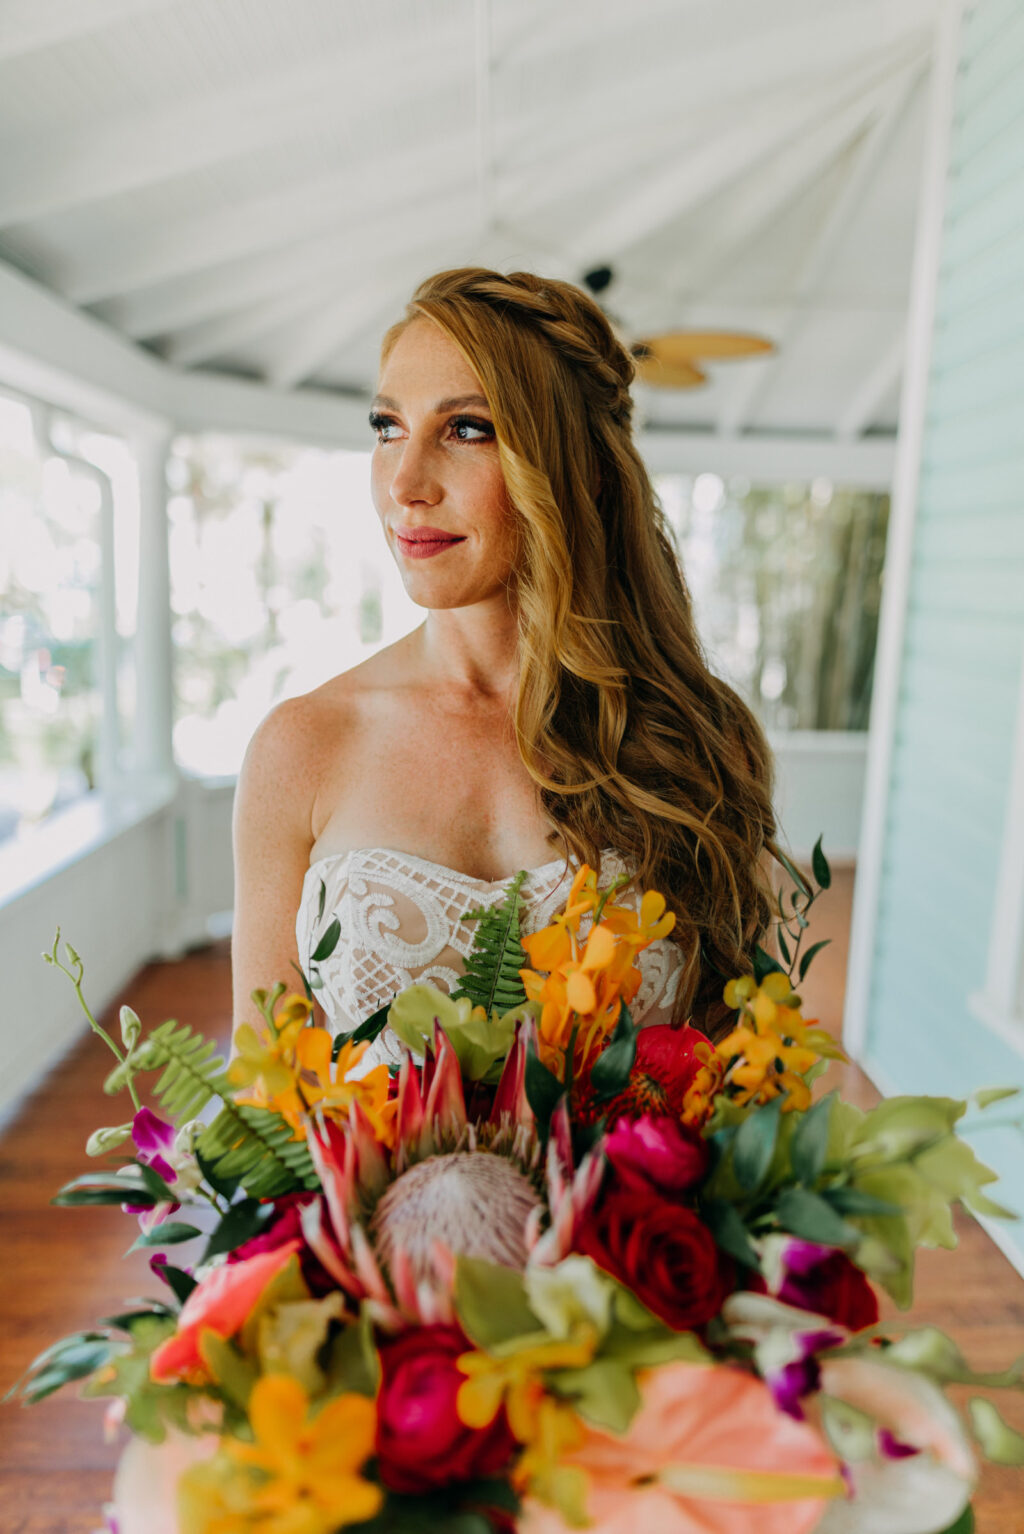 Tropical Boho Bride Holding Colorful Floral Bouqouet with King Protea and Pink Anthurium | Tampa Bay Wedding Photographer Amber McWhorter Photography | Wedding Hair and Makeup Femme Akoi Beauty Studio